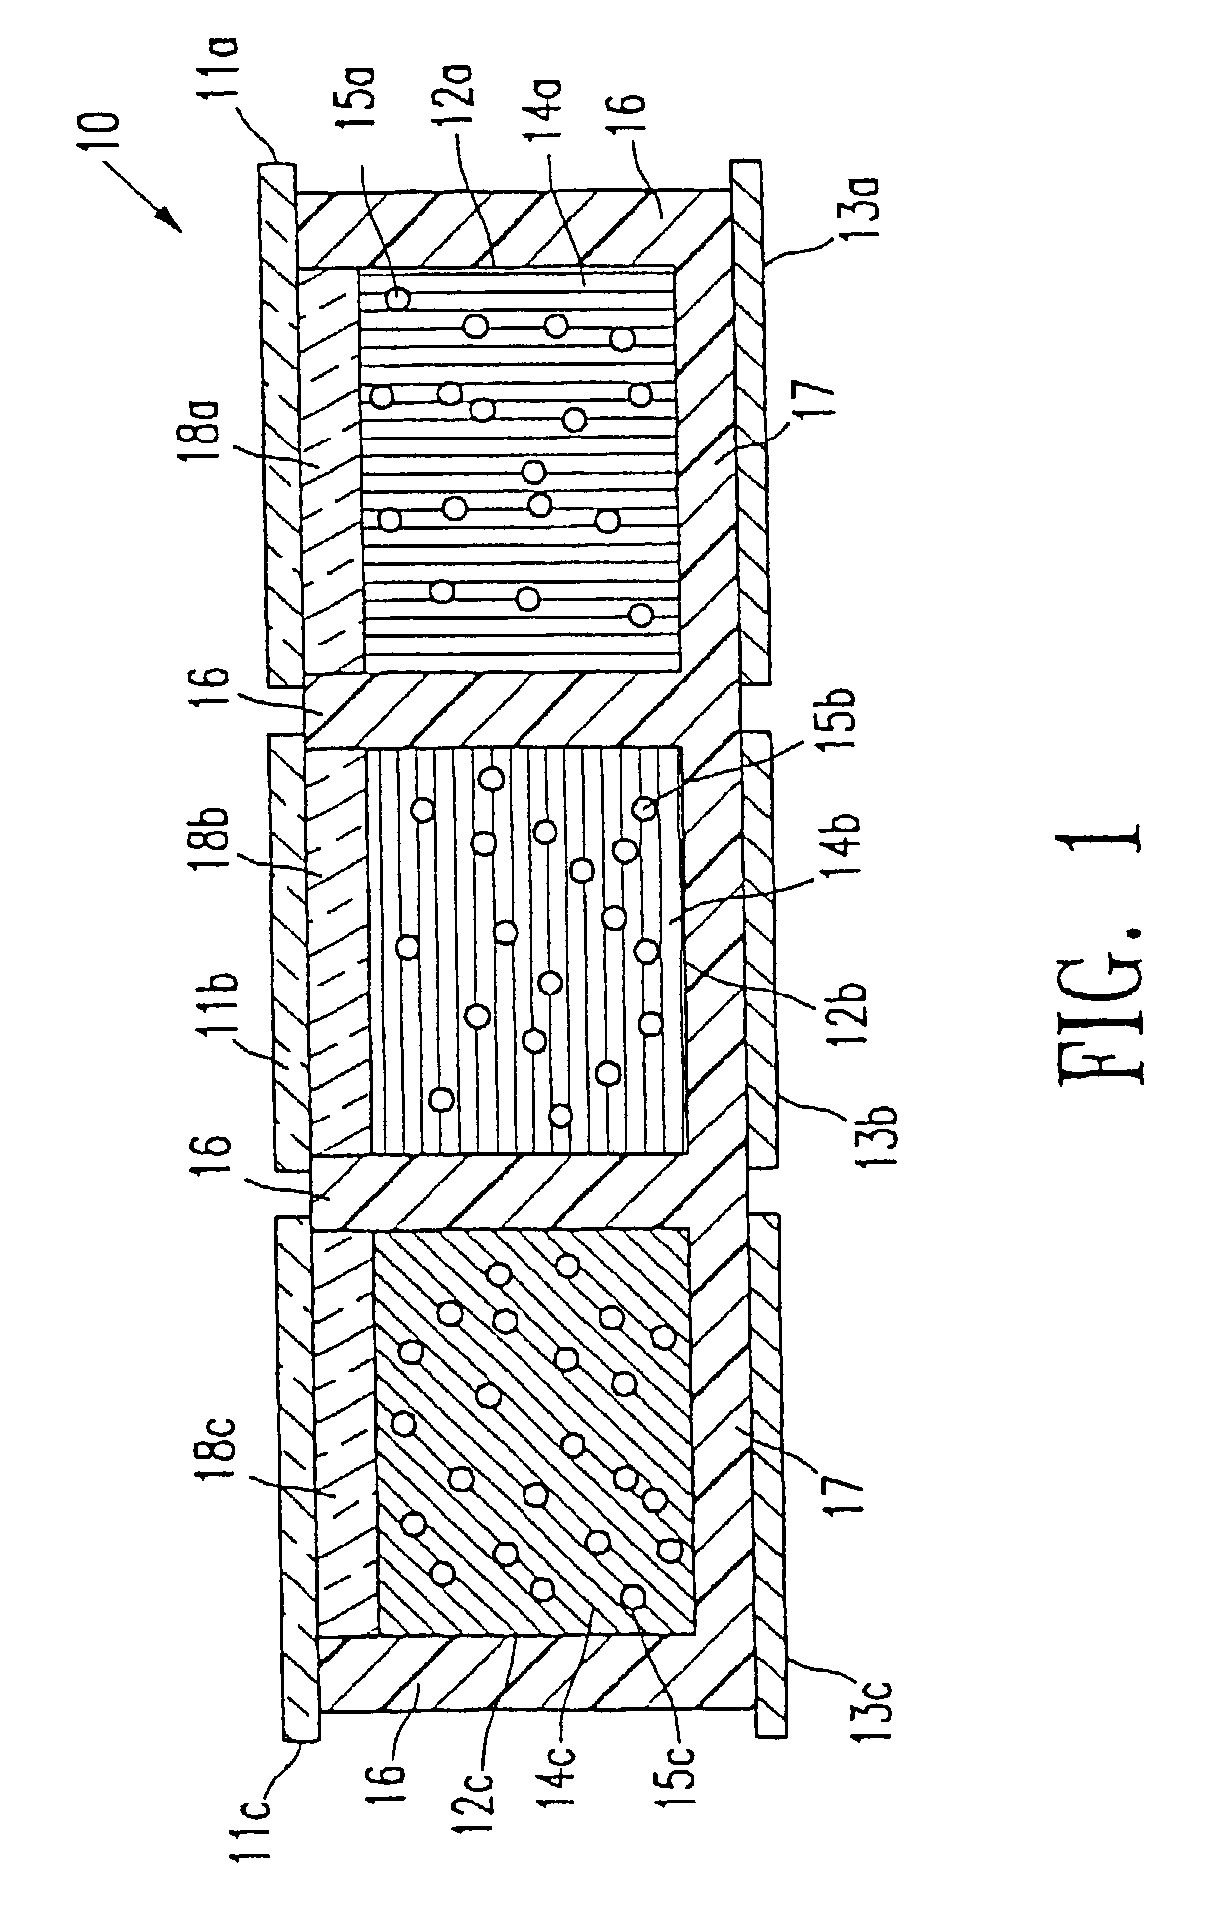 Composition and process for the sealing of microcups in roll-to-roll display manufacturing